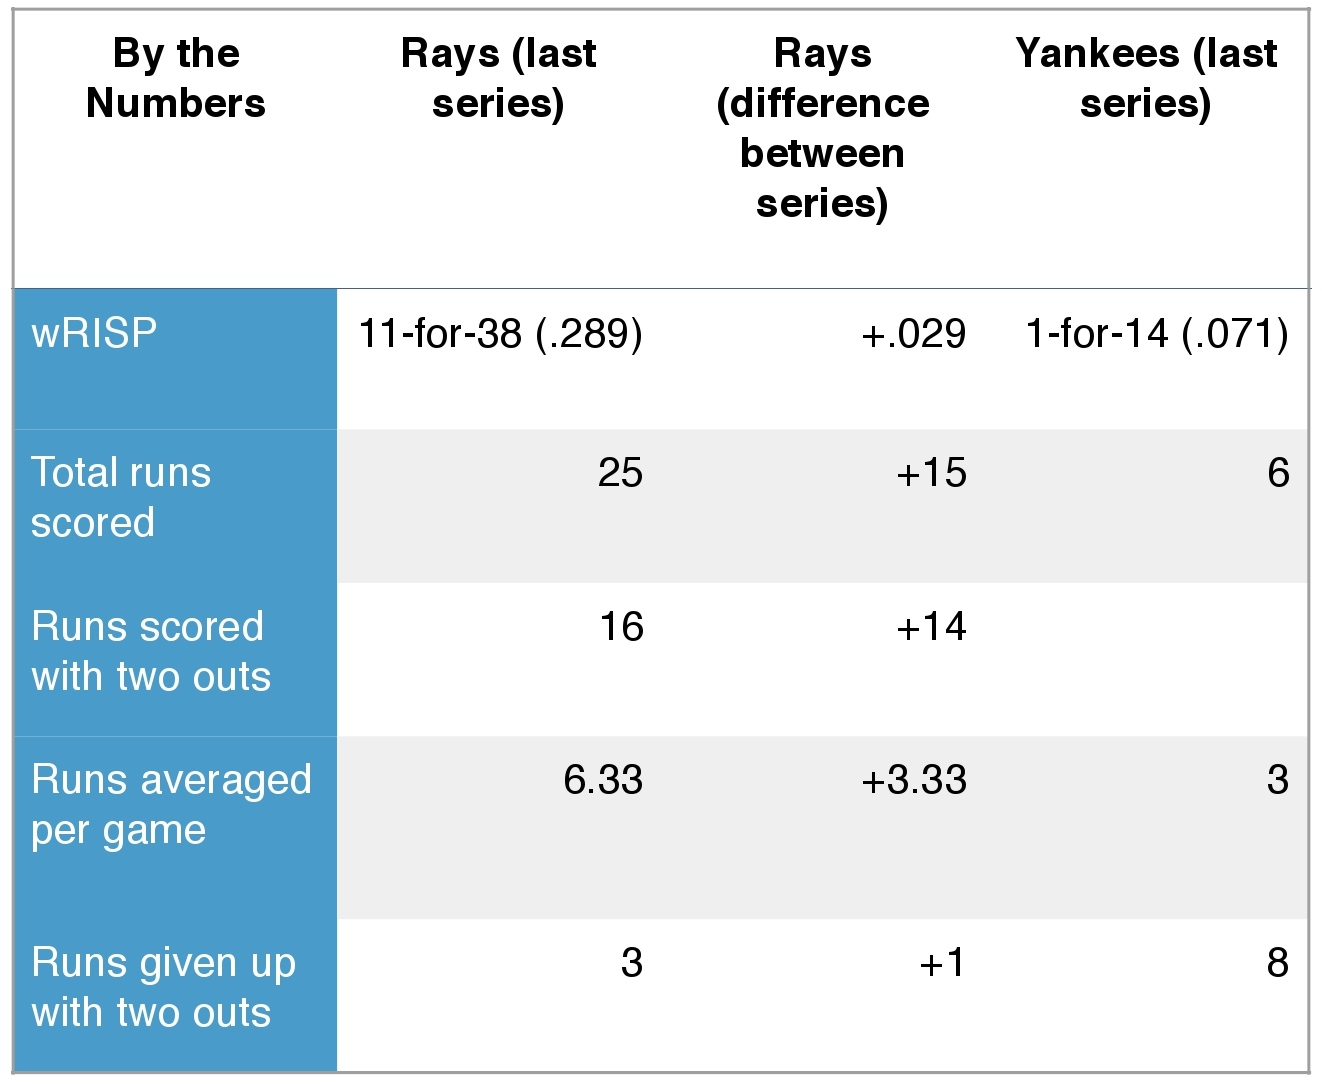 Rays and Yankees (by the numbers).